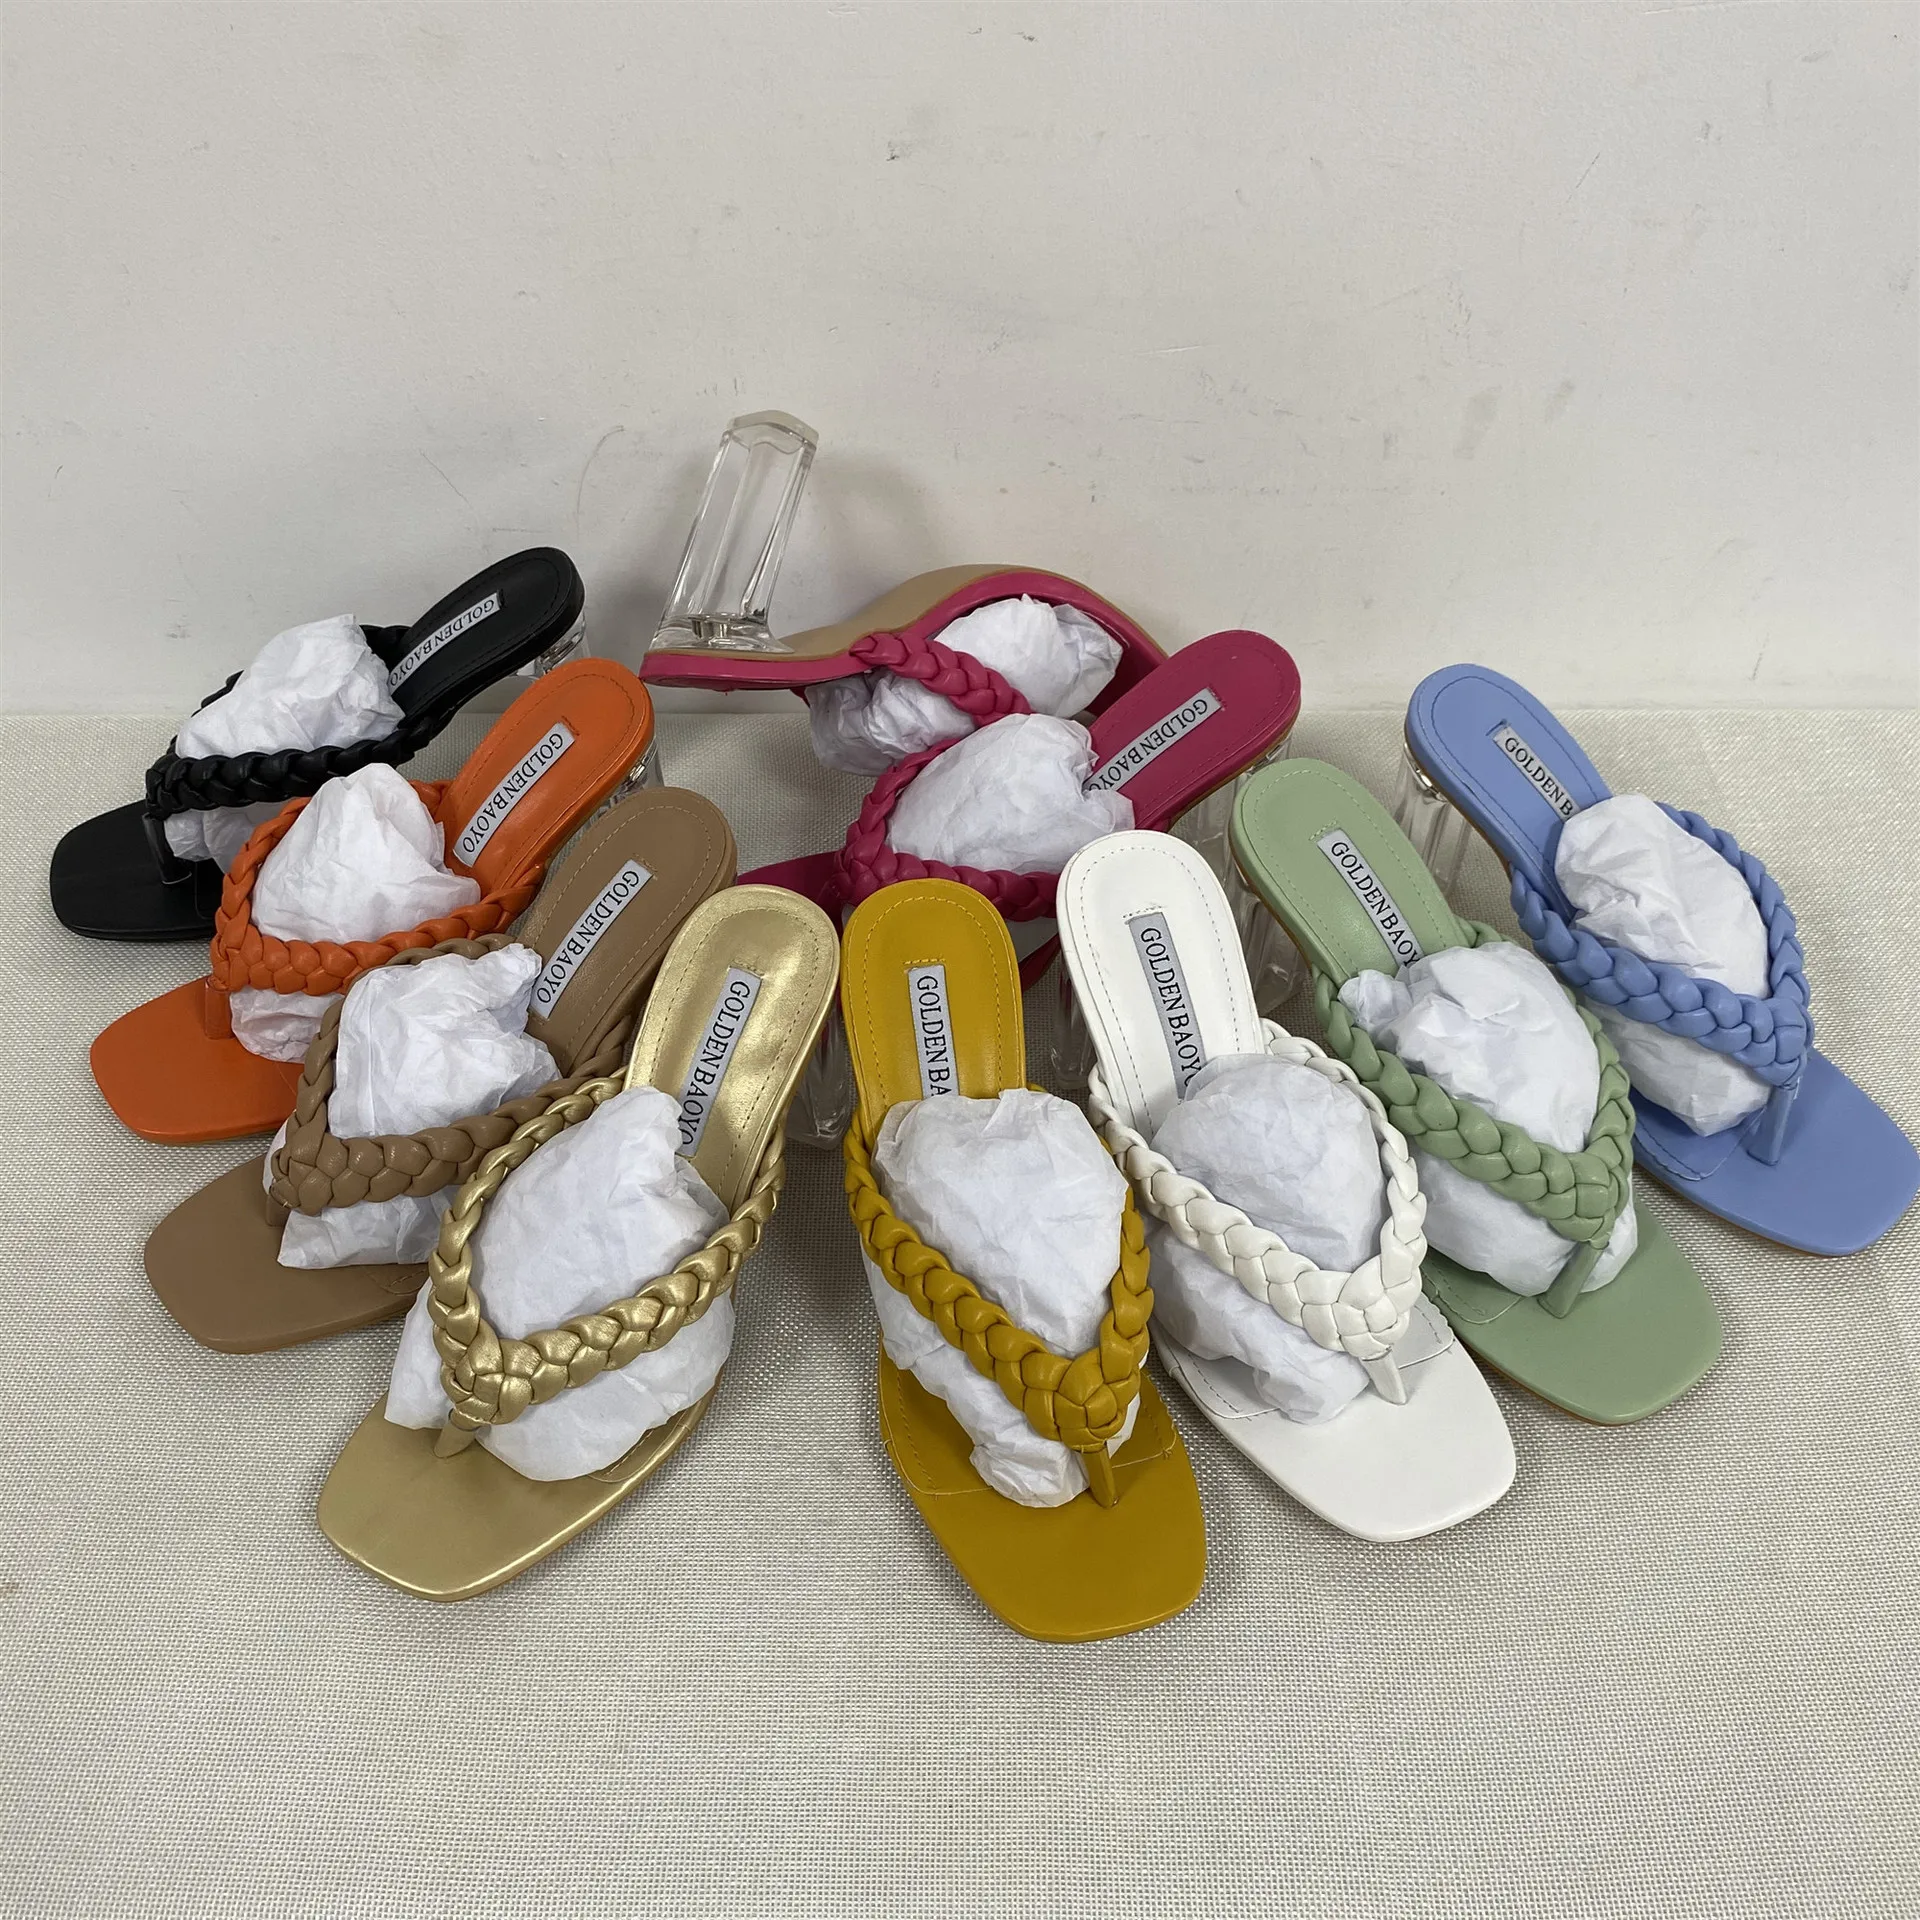 Sandalias Mujer Tacon Alto Designer Handmade Woven Braid Trendy Slippers Mules Shoes Heels for Ladies 2021, White, yellow, rosy pink, green, black, blue, gold, brown, orange